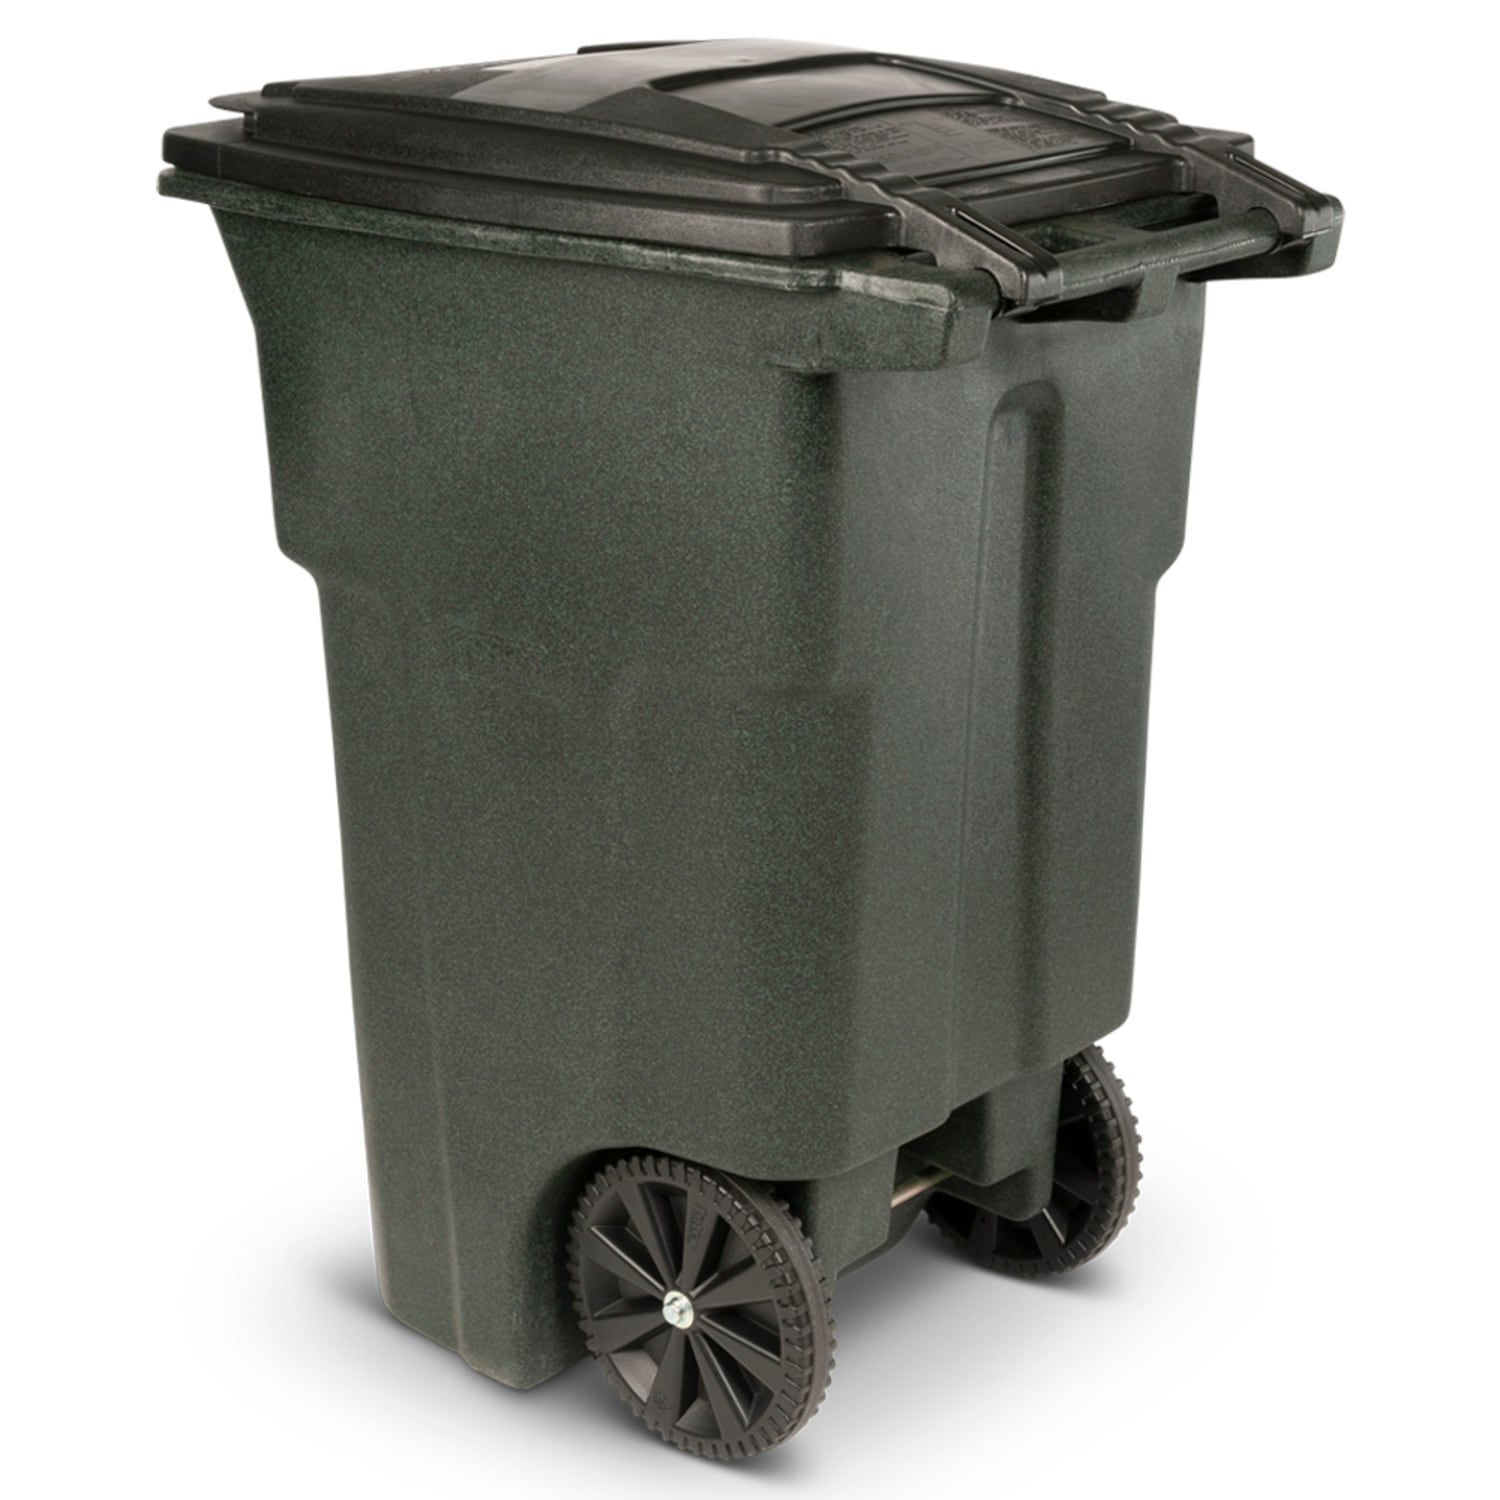 Toter Outdoor Trash Can 64-Gallons Greenstone Plastic Wheeled